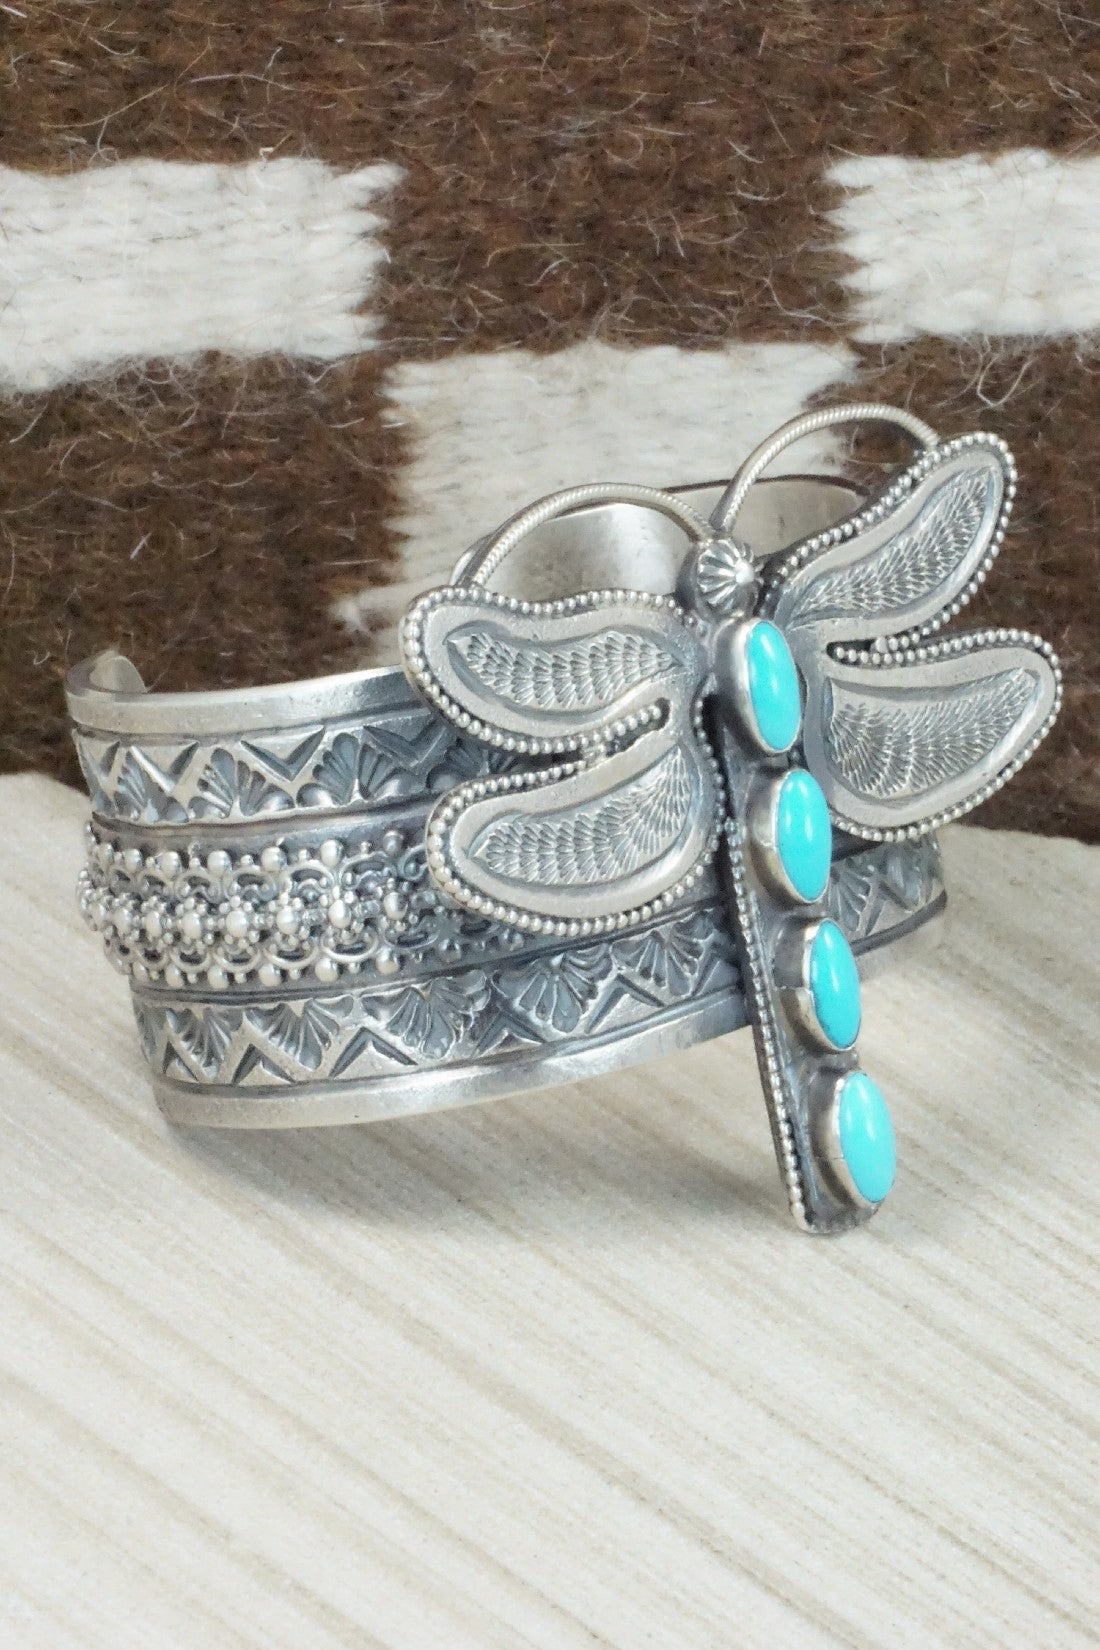 Turquoise & Sterling Silver Bracelet and Ring - Hemerson Brown